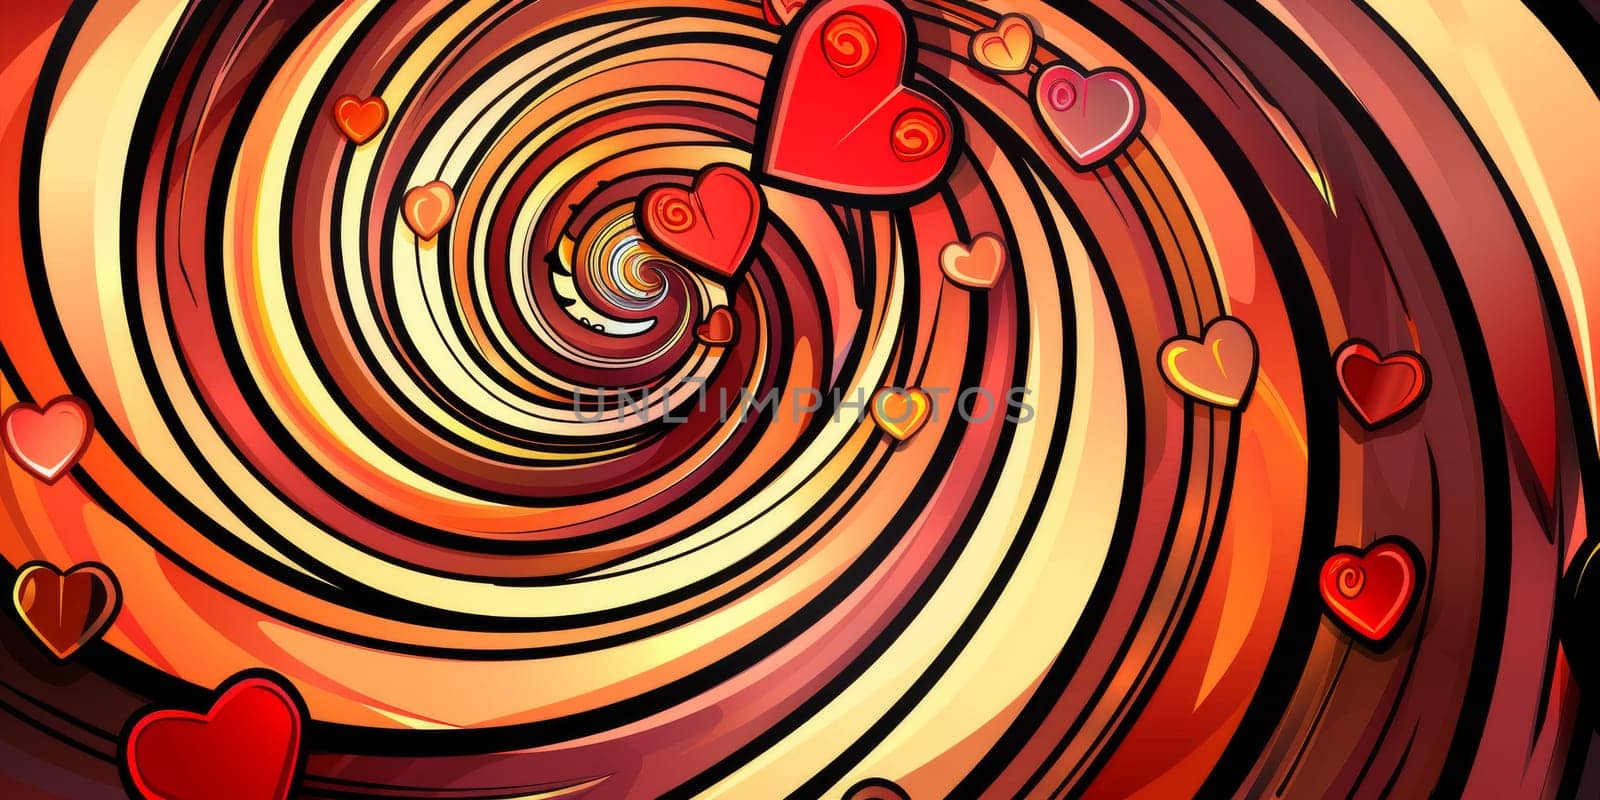 Warm color of a spiral with love icons around, carousel of falling in love and falling in love again concept